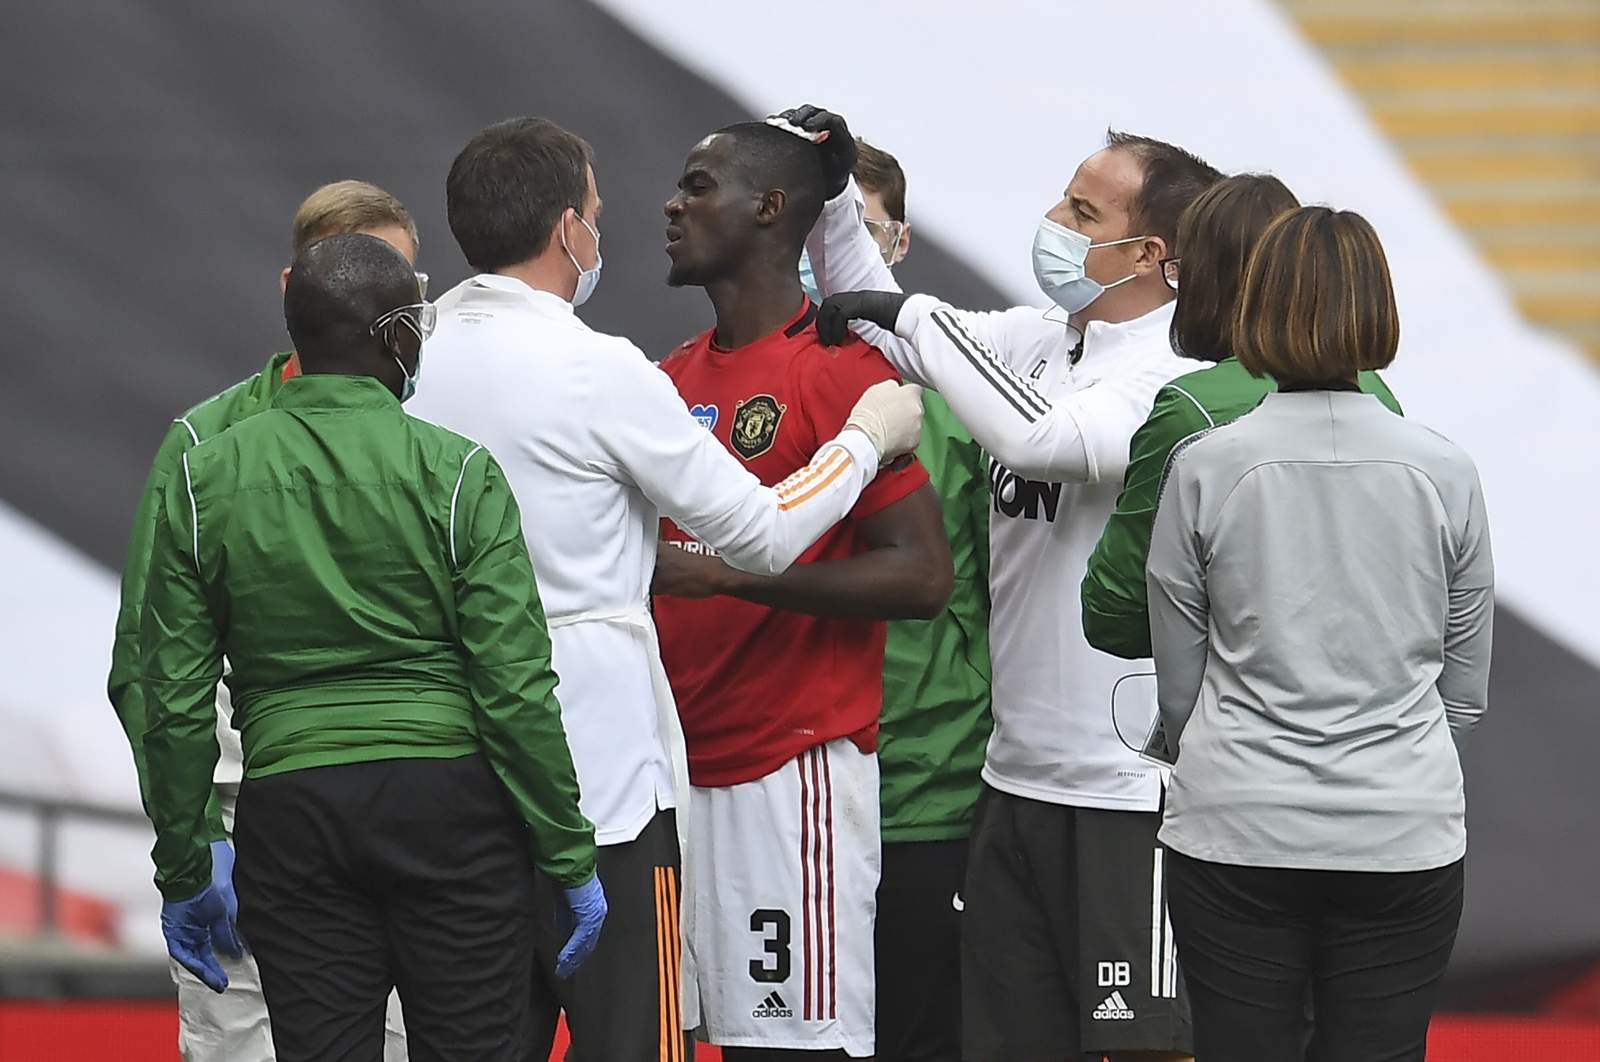 Man United's Bailly taken off after 2nd clash of heads